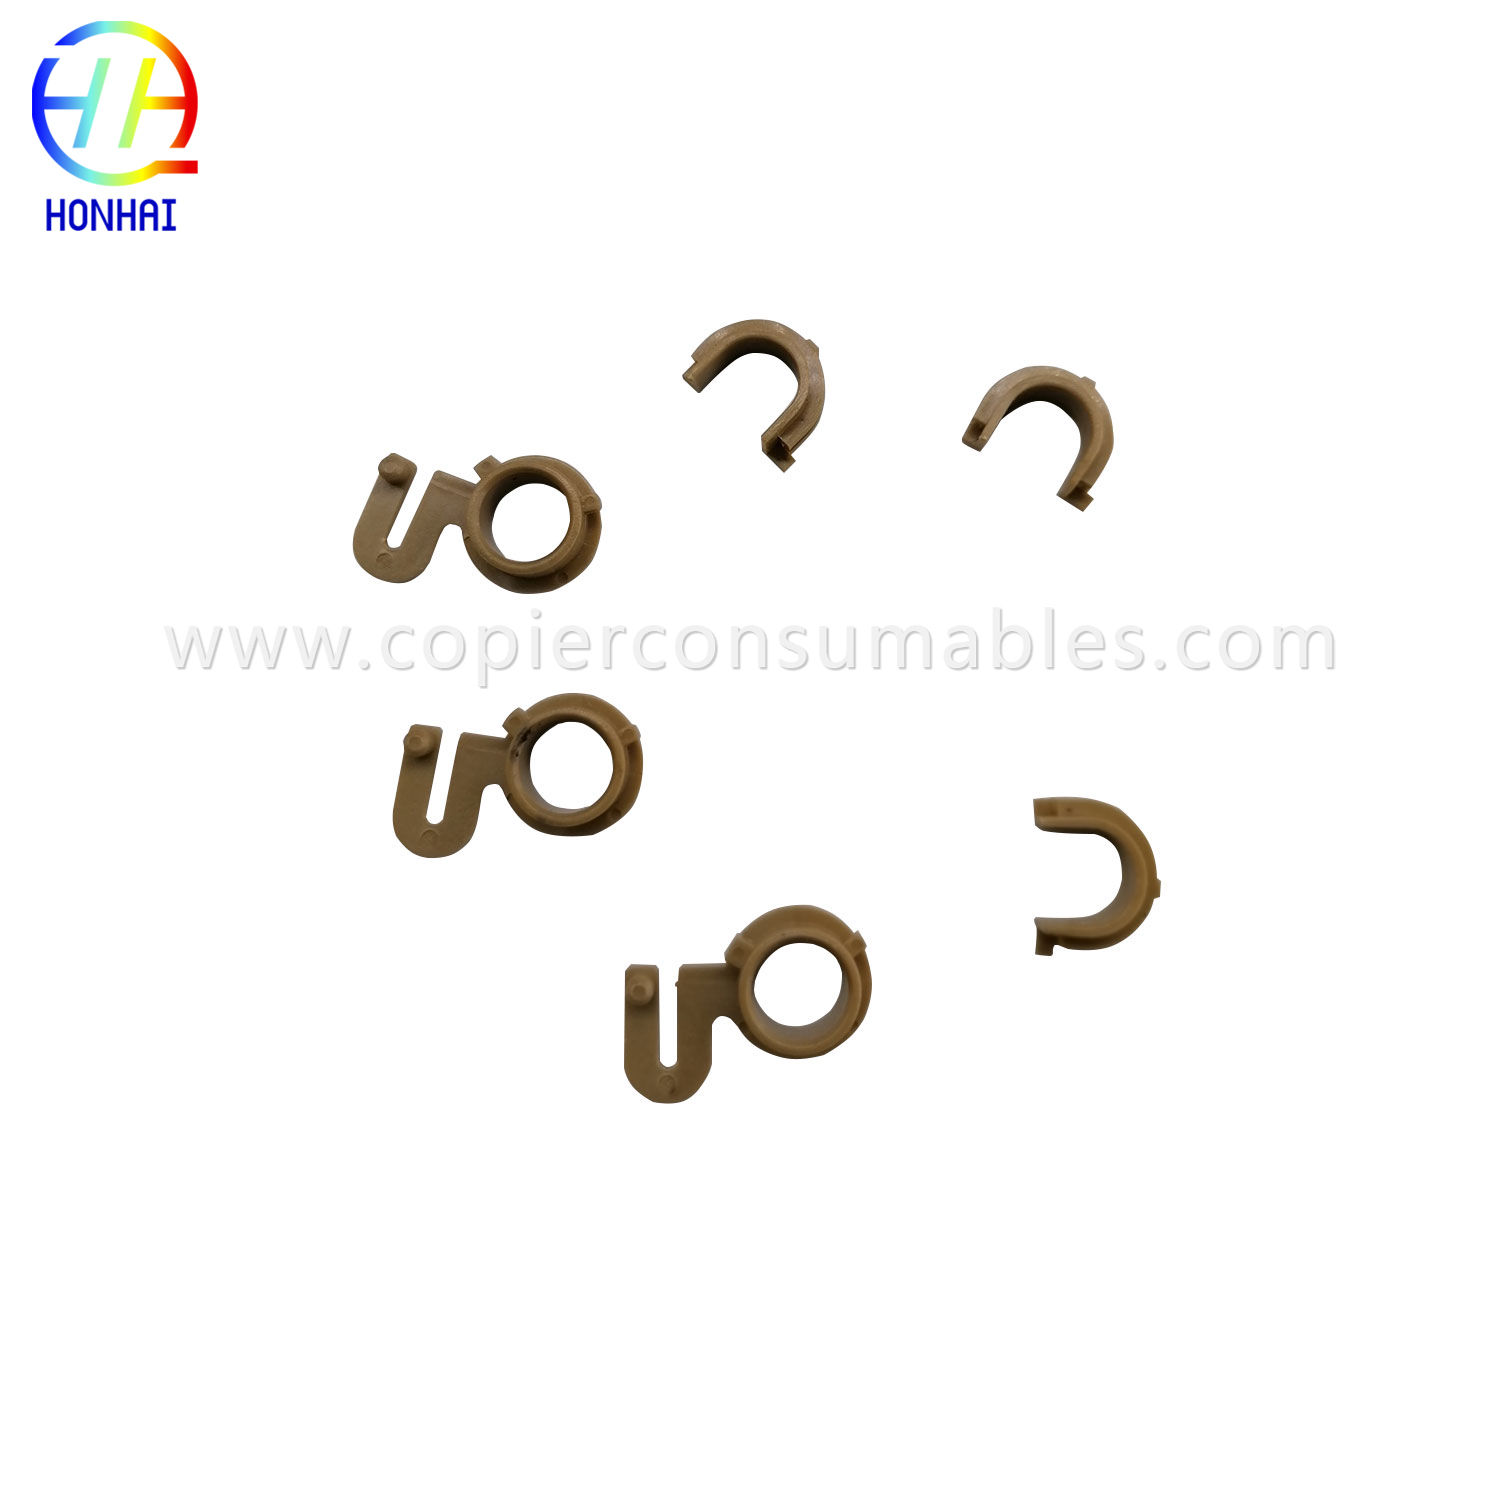 BUSHING-FOR-HP-2420-RC1-3610-000- (4) 拷贝